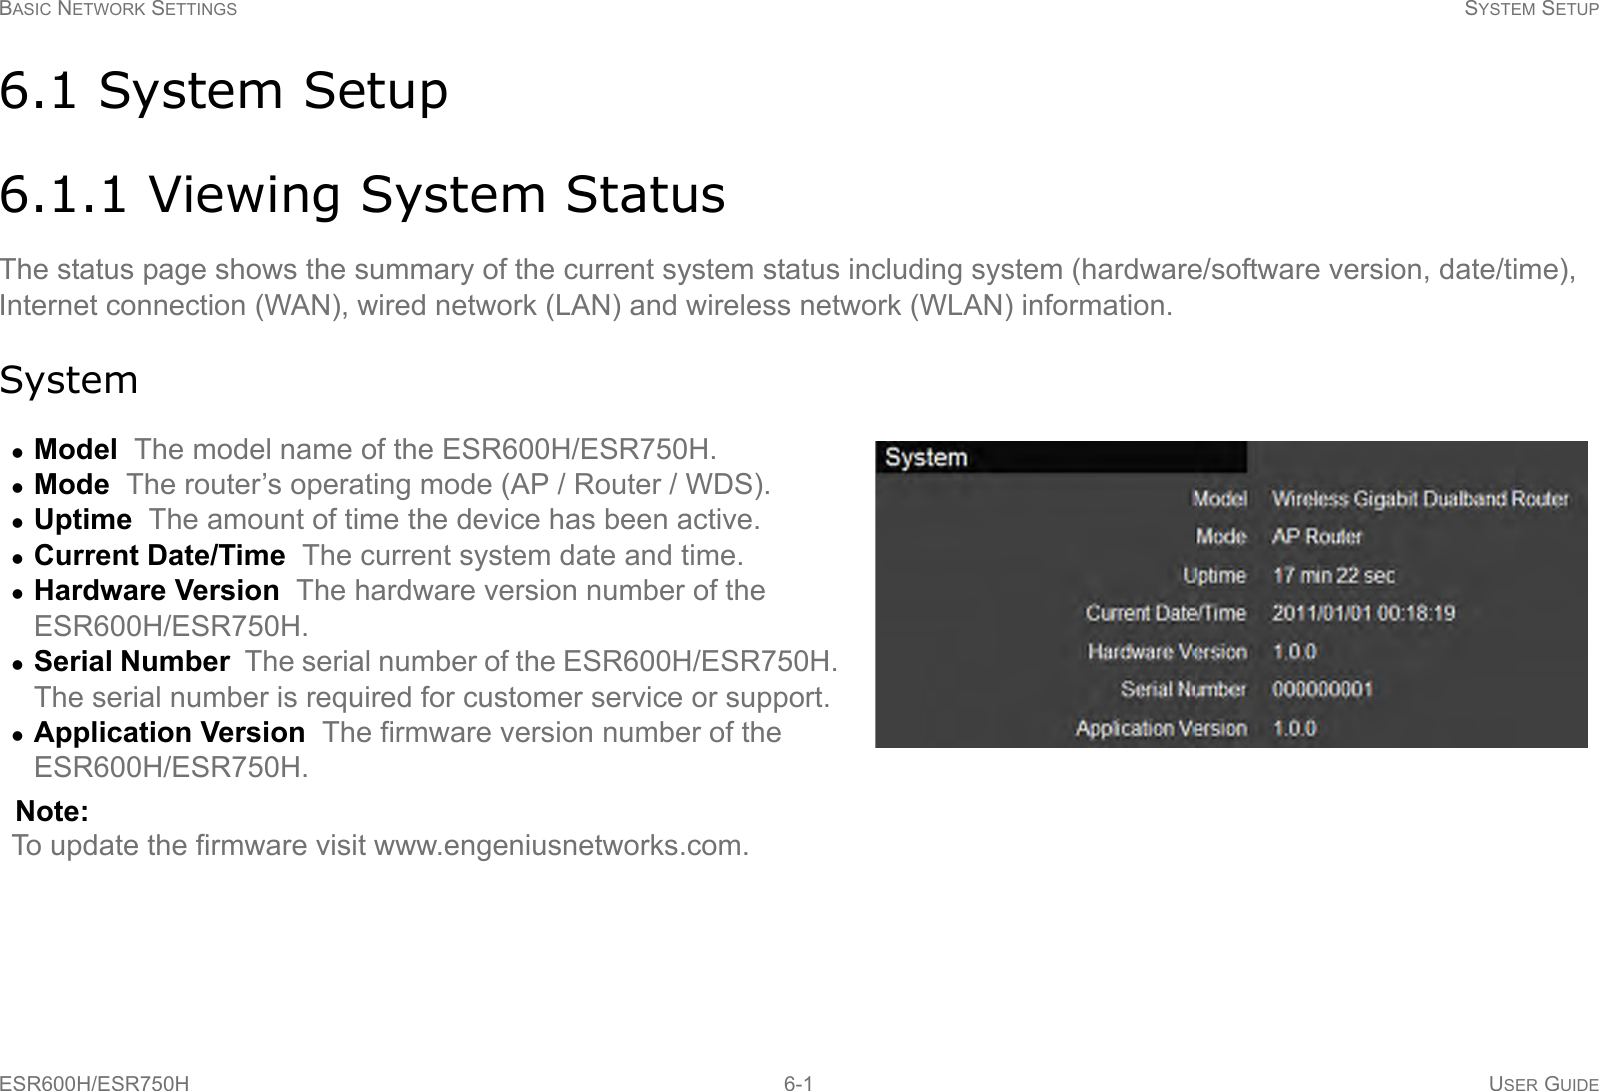 BASIC NETWORK SETTINGS SYSTEM SETUPESR600H/ESR750H 6-1 USER GUIDE6.1 System Setup6.1.1 Viewing System StatusThe status page shows the summary of the current system status including system (hardware/software version, date/time), Internet connection (WAN), wired network (LAN) and wireless network (WLAN) information.SystemModel  The model name of the ESR600H/ESR750H.Mode  The router’s operating mode (AP / Router / WDS).Uptime  The amount of time the device has been active.Current Date/Time  The current system date and time.Hardware Version  The hardware version number of the ESR600H/ESR750H.Serial Number  The serial number of the ESR600H/ESR750H. The serial number is required for customer service or support.Application Version  The firmware version number of the  ESR600H/ESR750H.Note:To update the firmware visit www.engeniusnetworks.com.